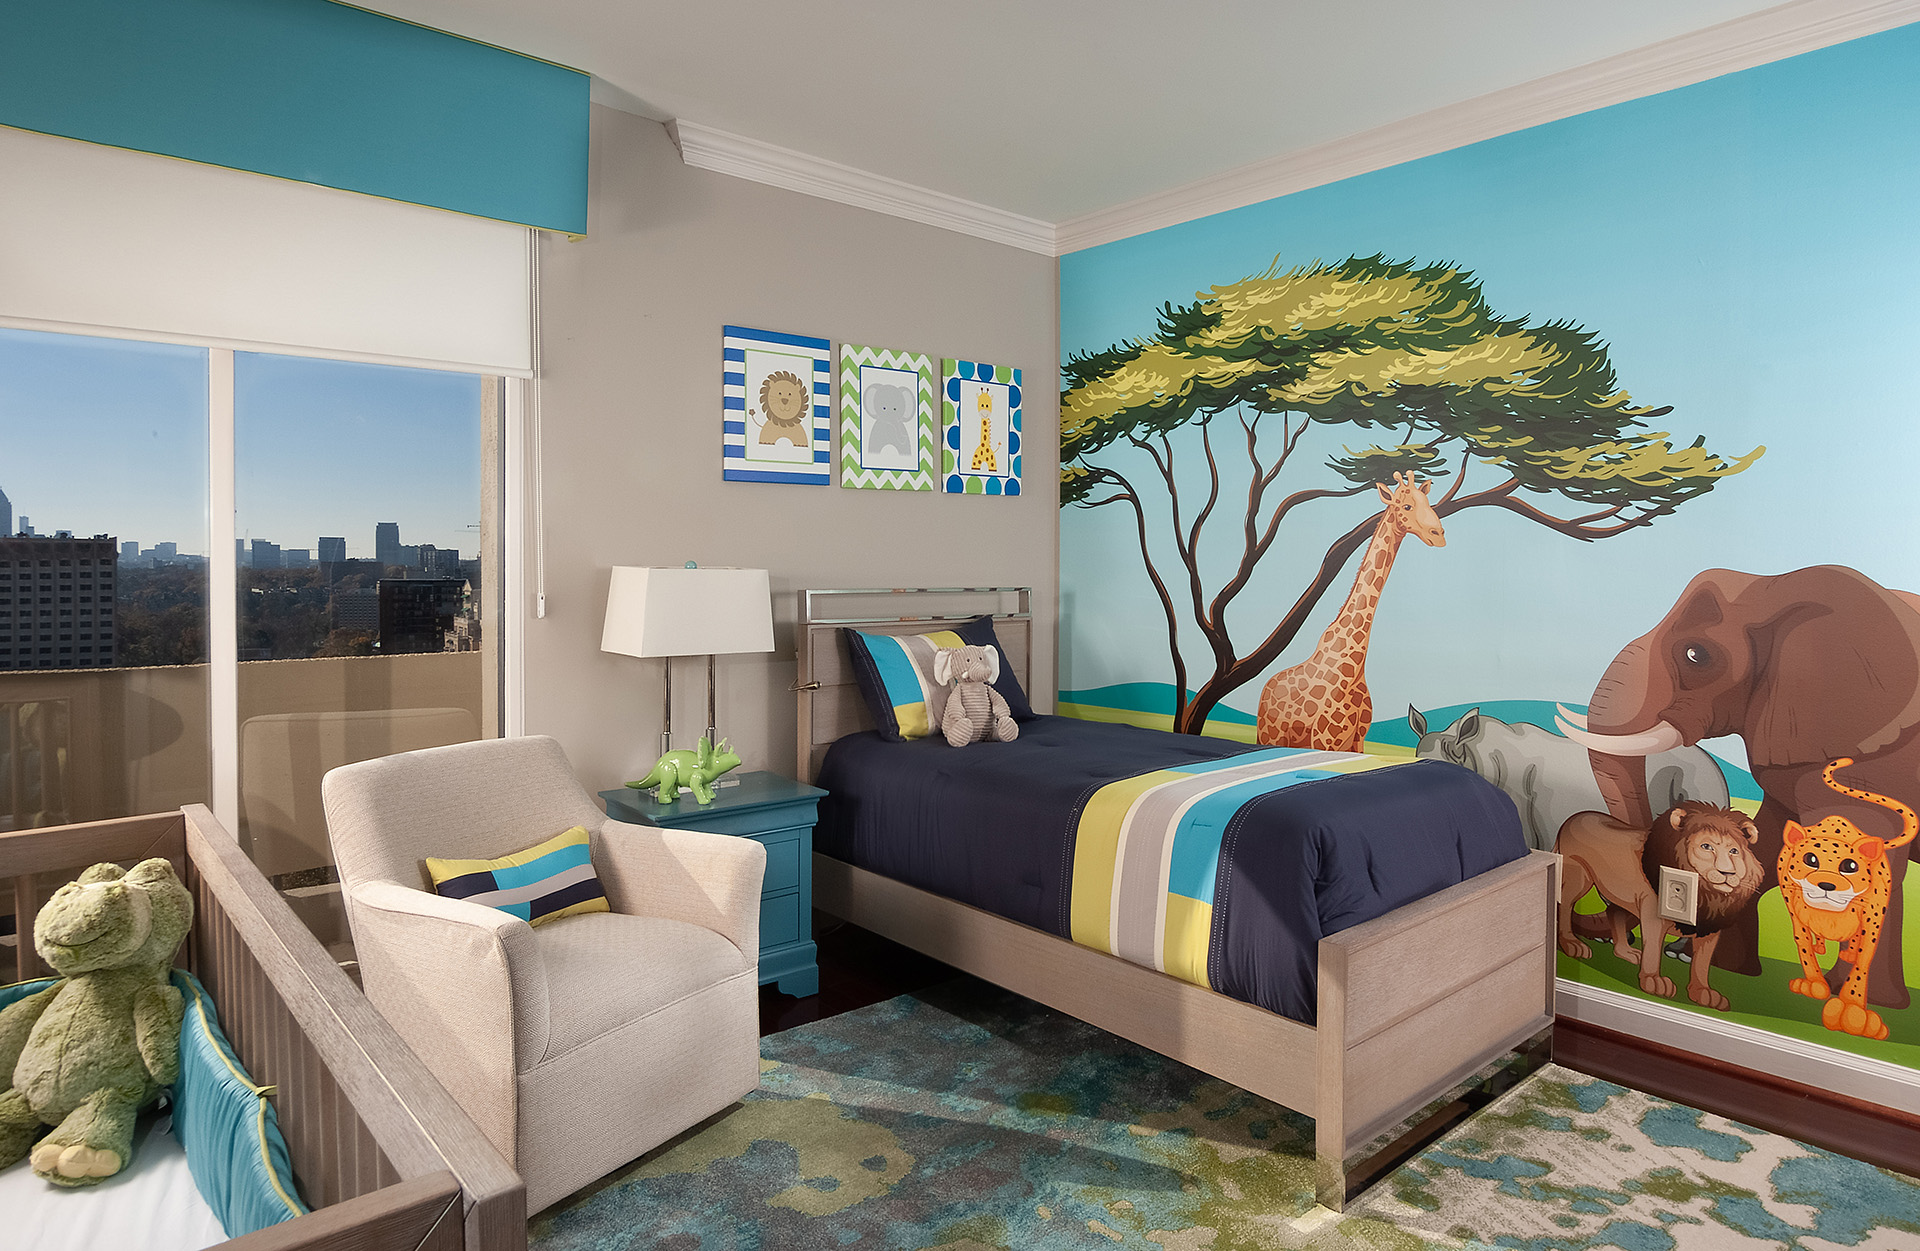 A photo of a colorful and playful children's room with an accent wall, wallart, and a vibrant area rug.